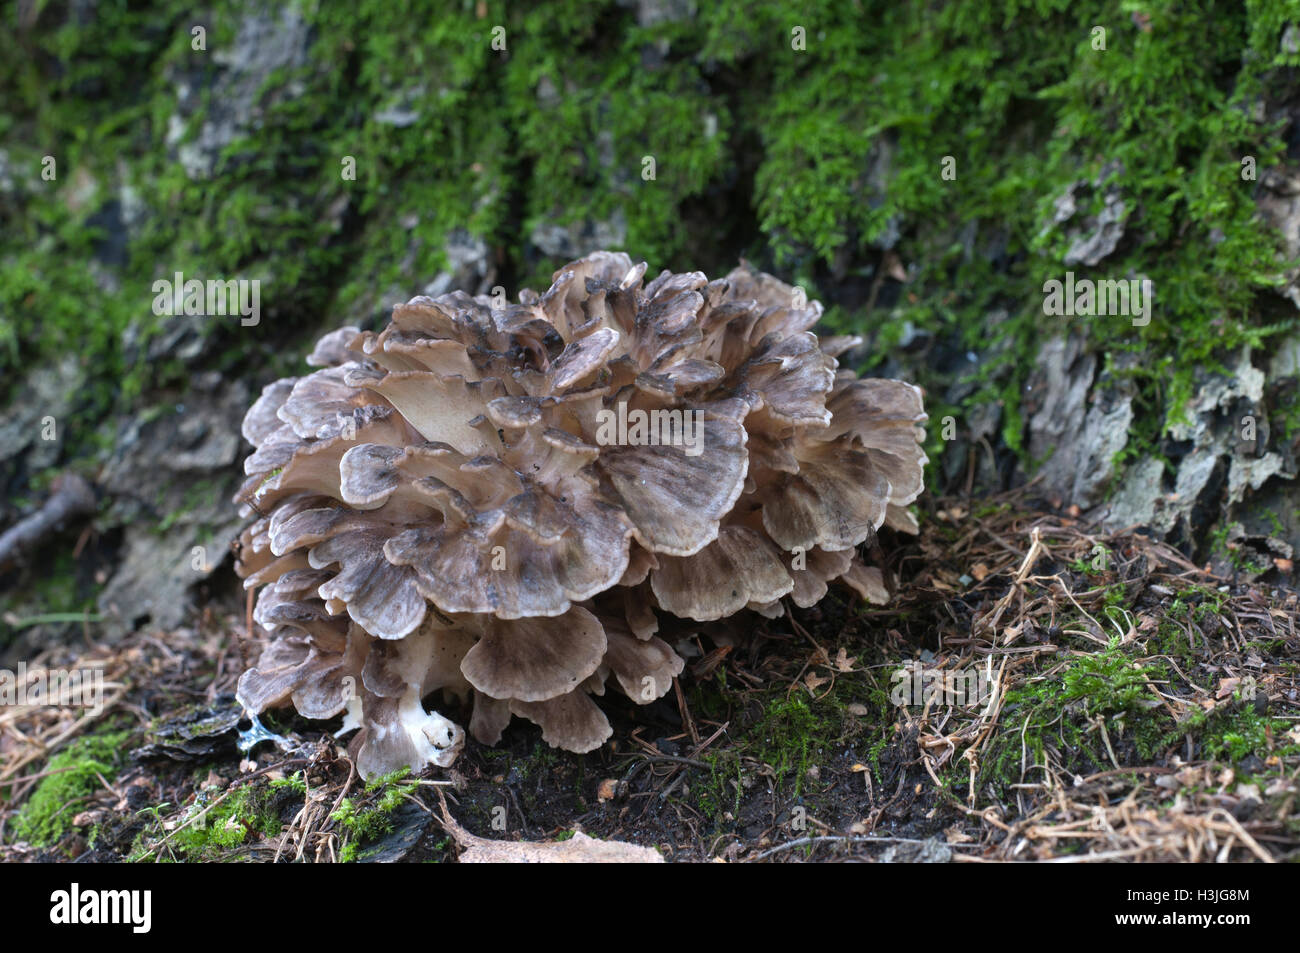 Grifola frondosa, edible polyporus mushroom whidele khown in Far East and North America. Stock Photo